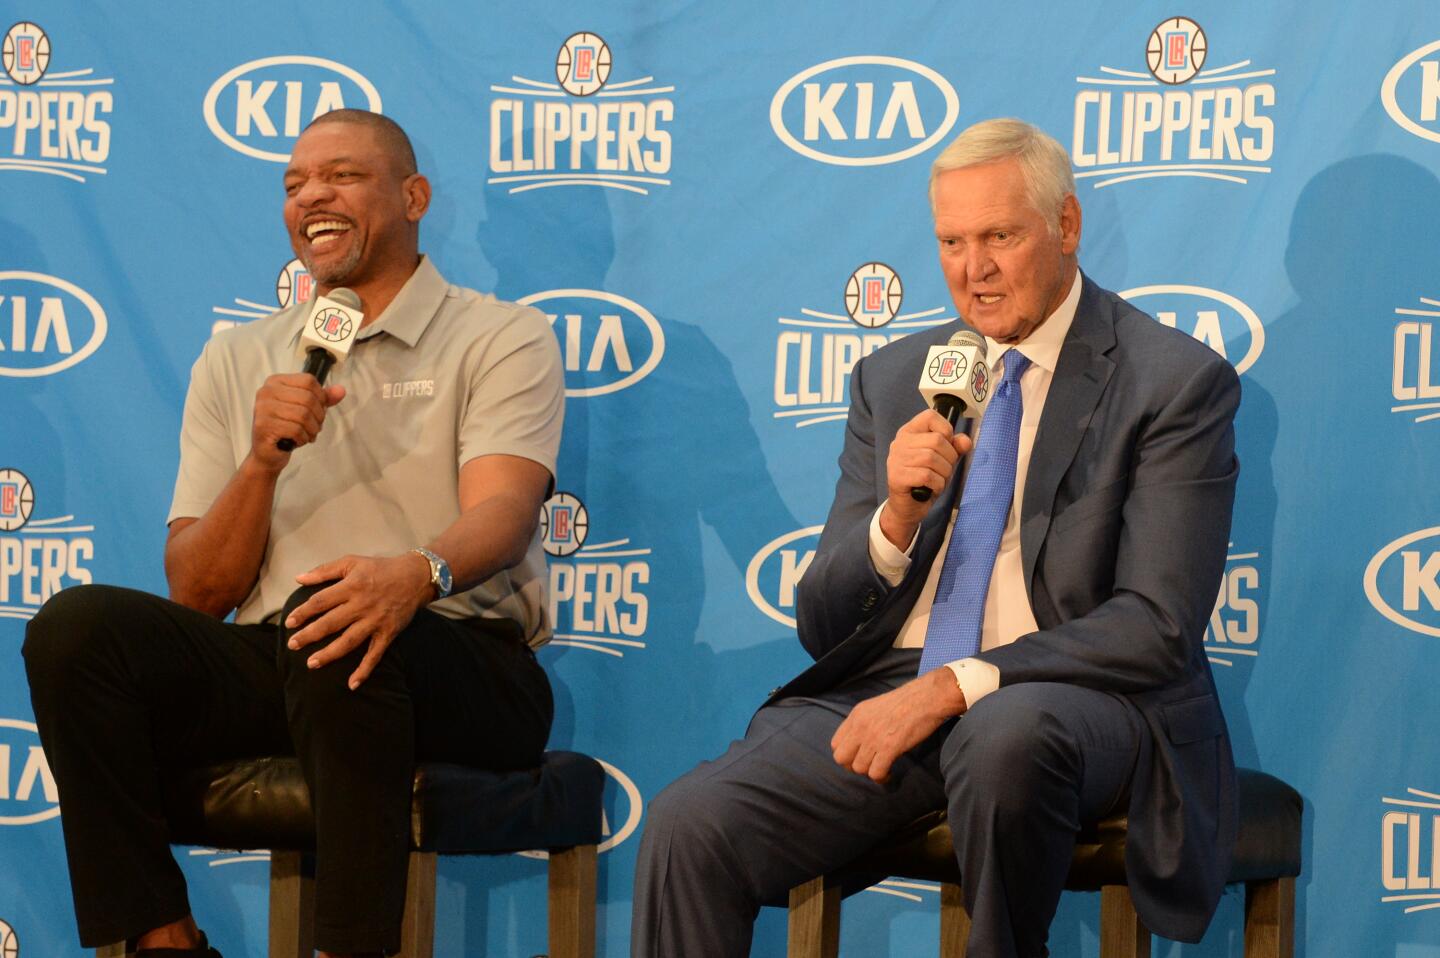 Jerry West and Clippers coach Doc Rivers speak during a news conference introducing West as a consultant for the team.